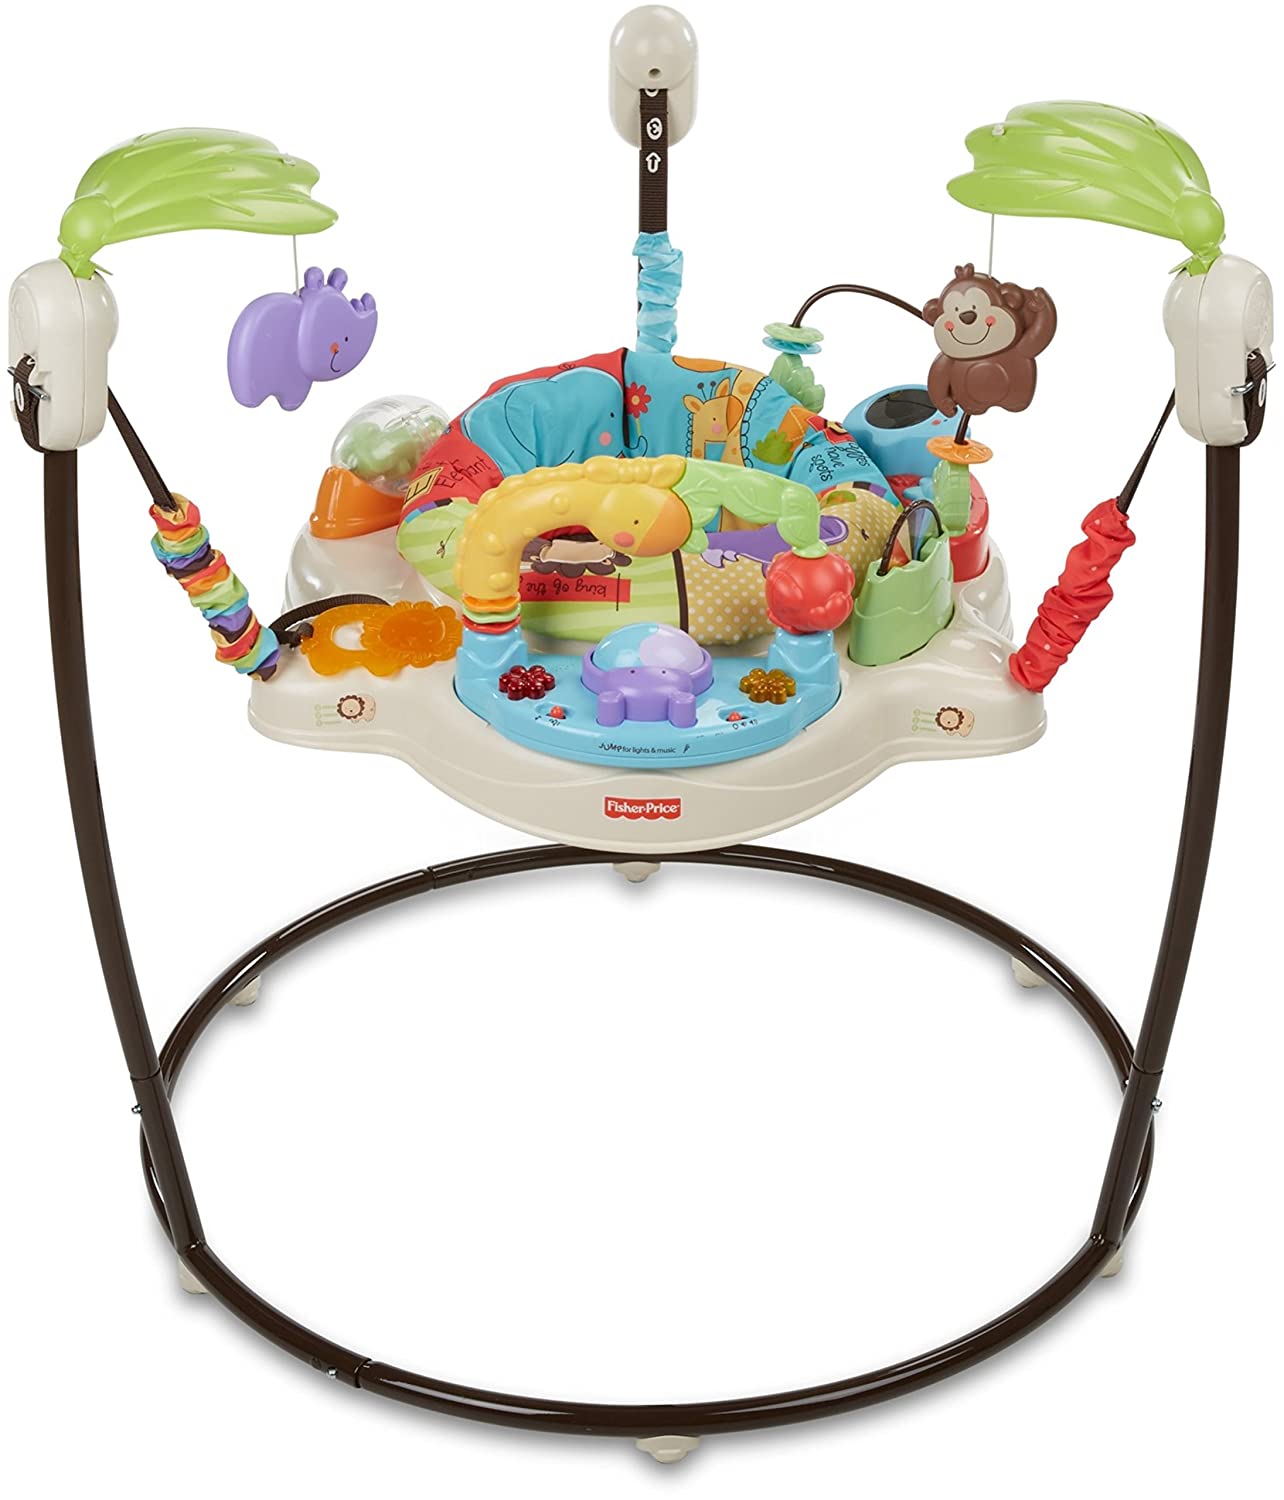 7 Best Fisher Price Jumperoo Reviews in 2023 3